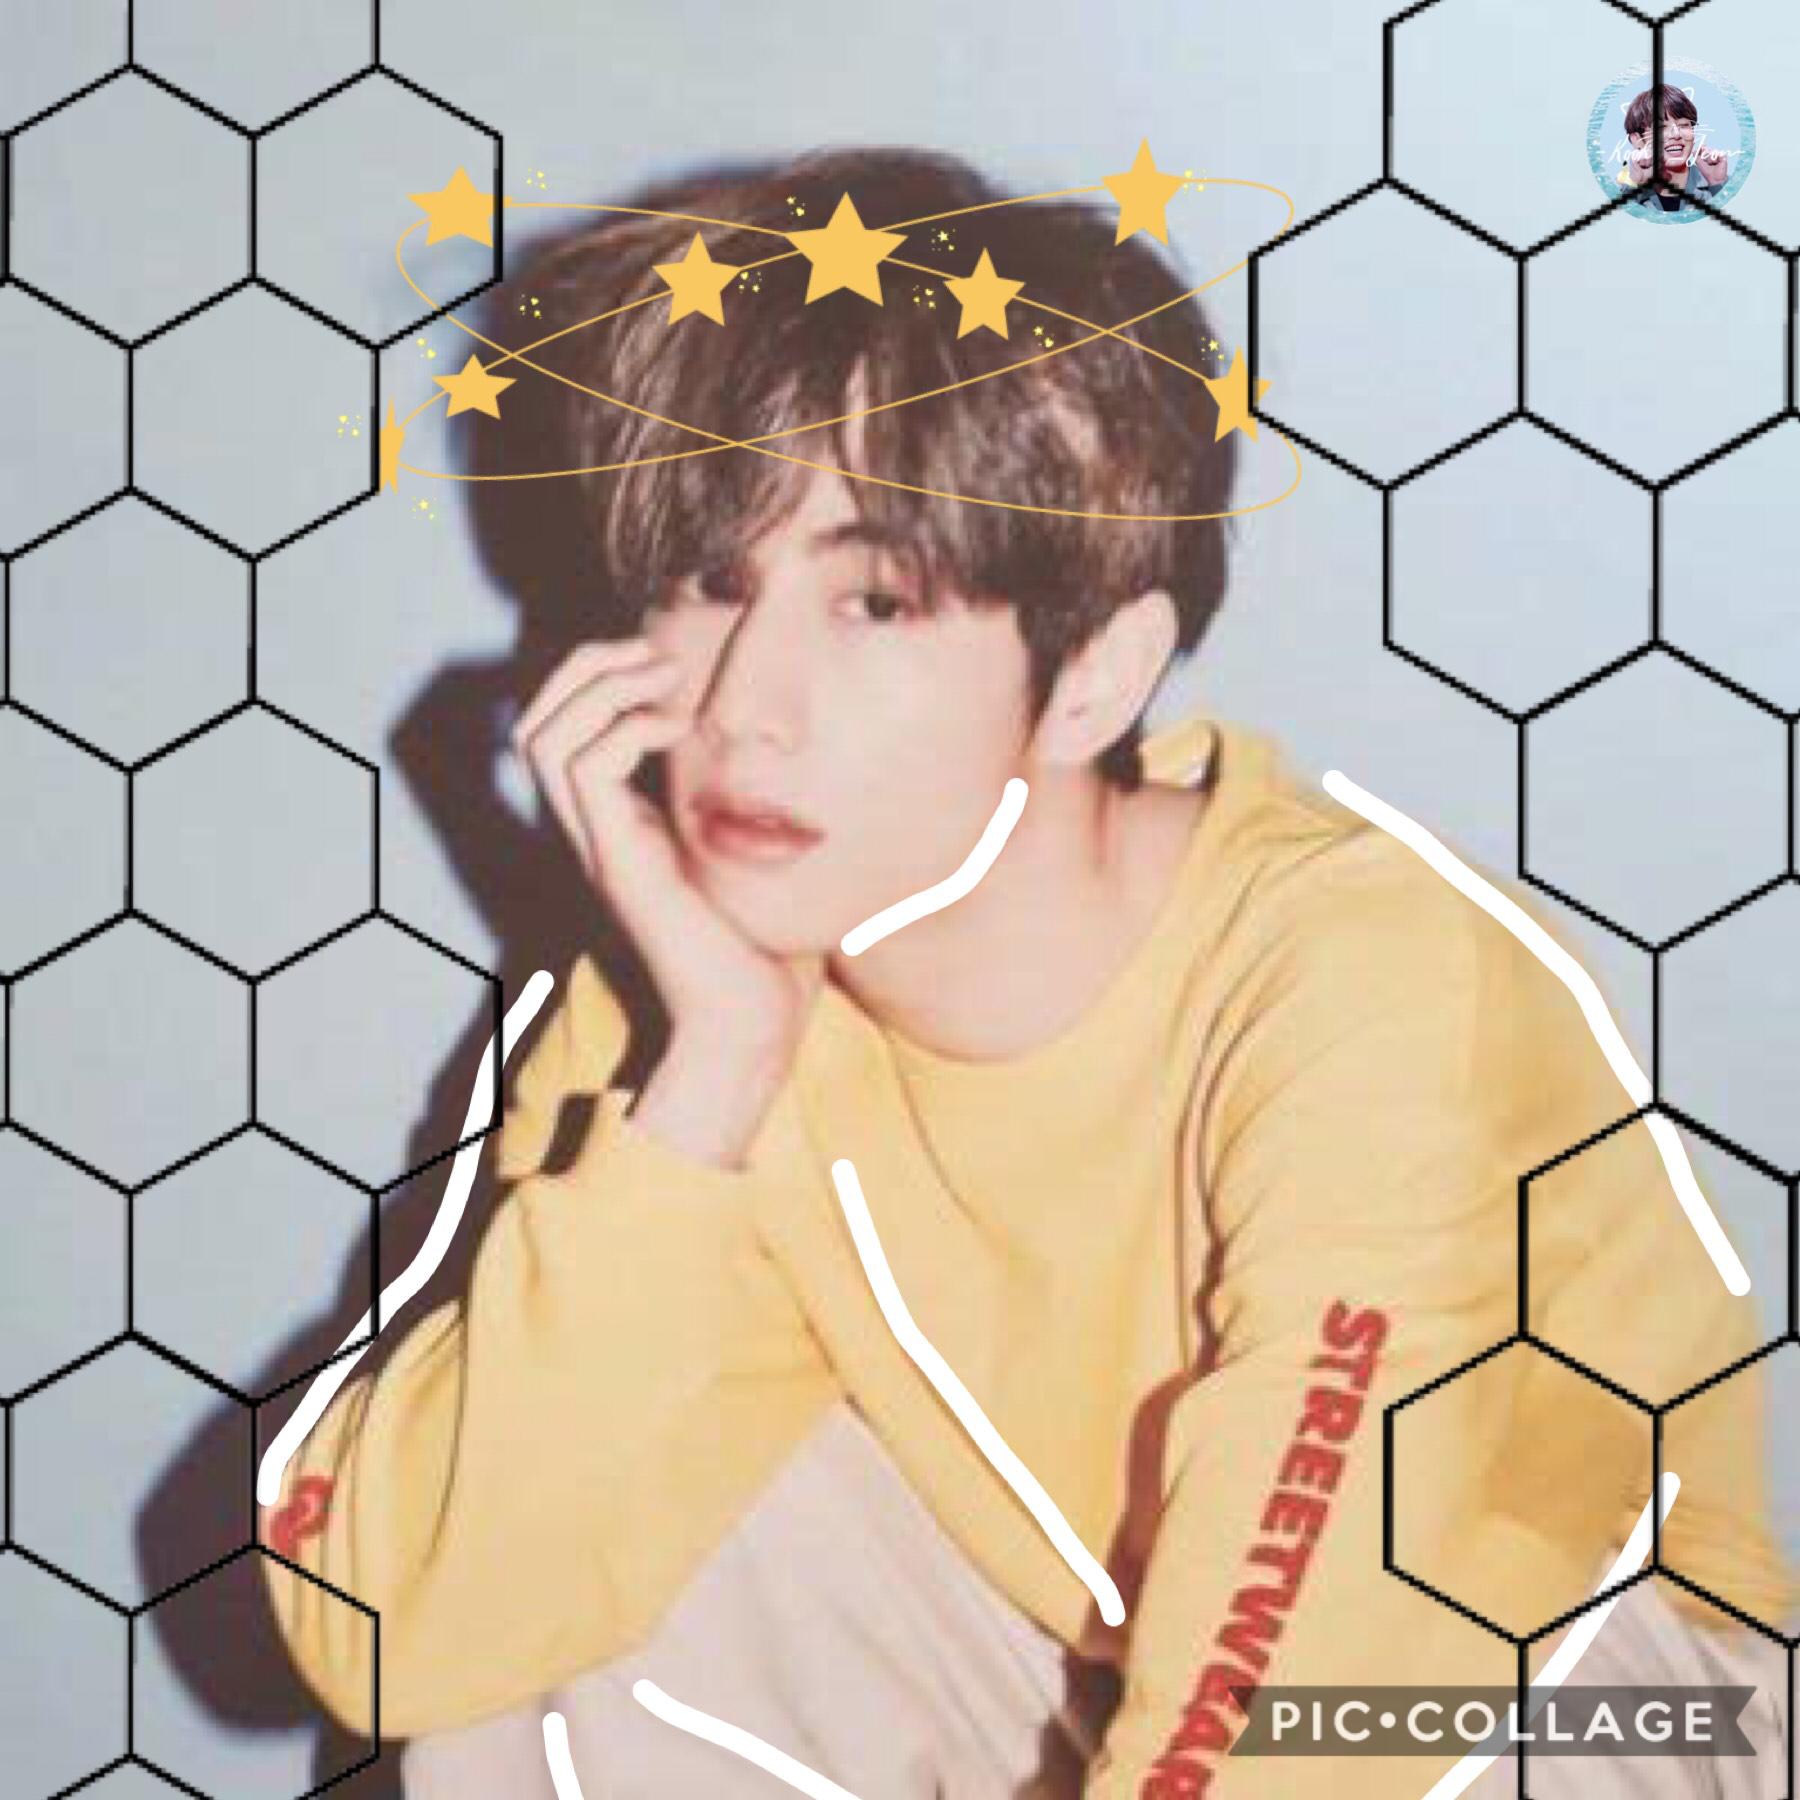 ⭐️TAP⭐️
^ Not really good but I tried...